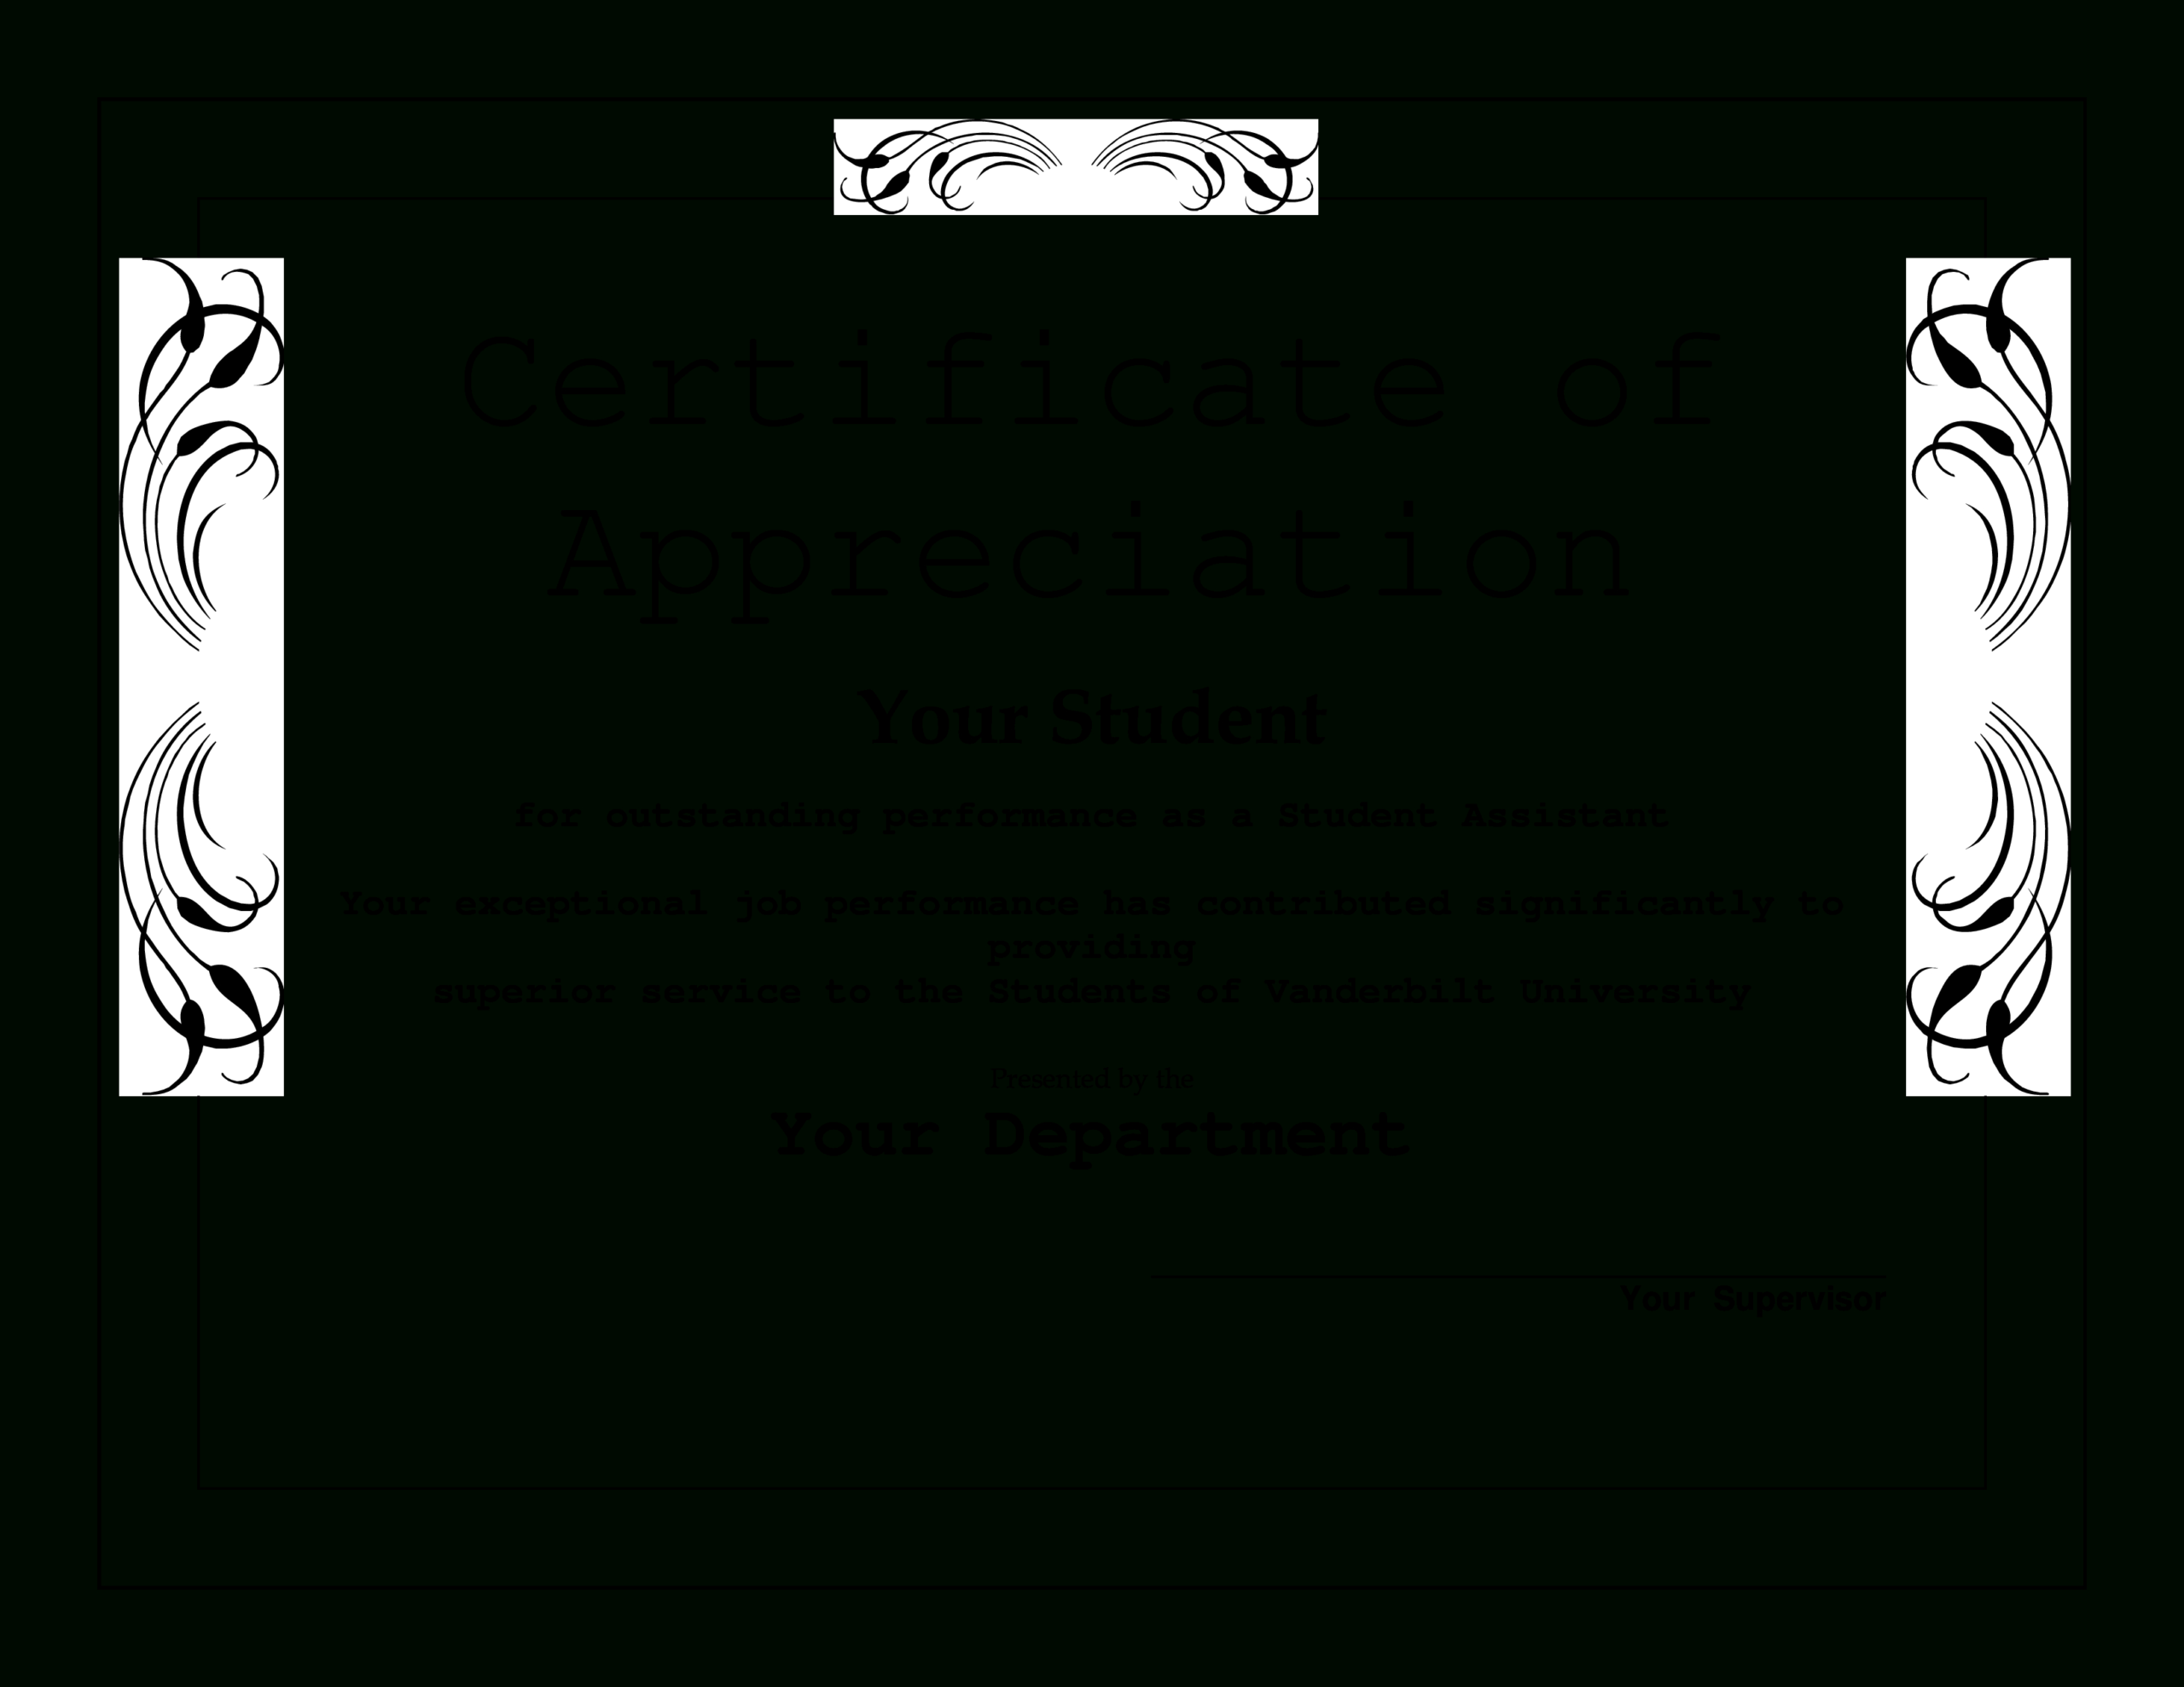 Student Appreciation Award | Templates At Intended For Student Of The Year Award Certificate Templates